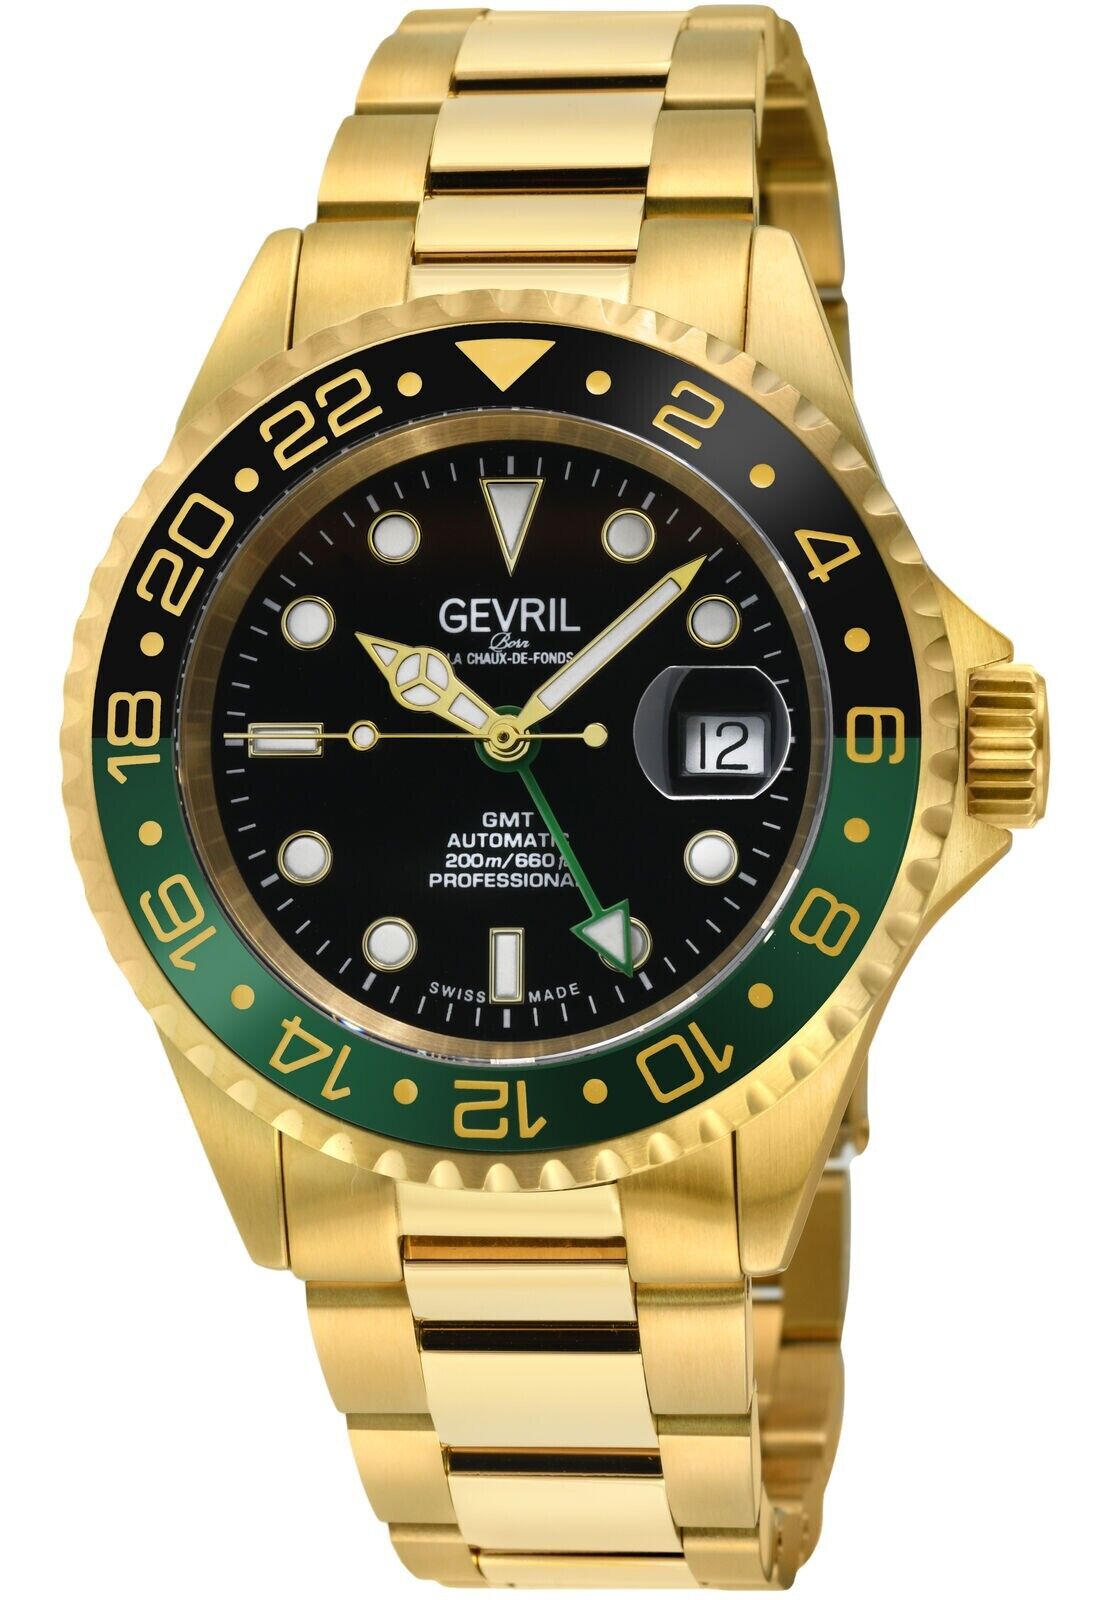 Pre-owned Gevril Mens 4956a Wall Street Ceramic Bezel Date Swiss Automatic Gmt Sw330 Watch